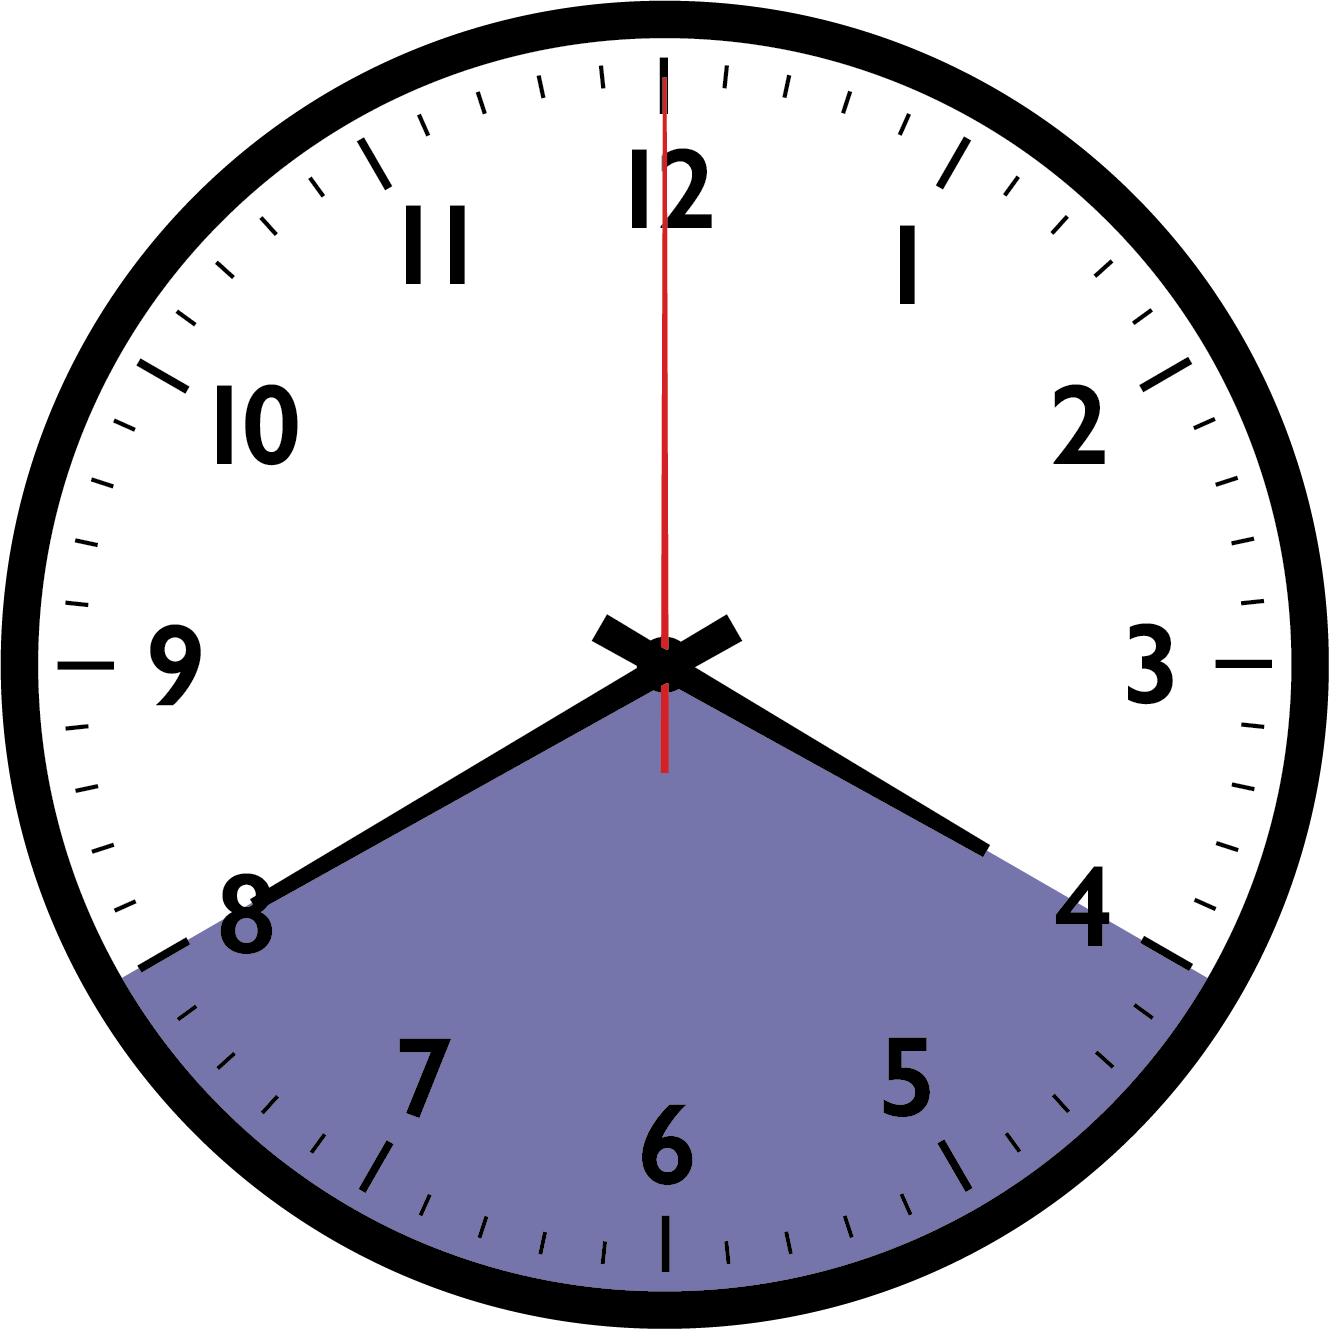 A clock has its hour hand at 4 and minute hand at 8. The area from 4 o'clock to 8 o'clock are shaded in purple, representing 20 minutes.